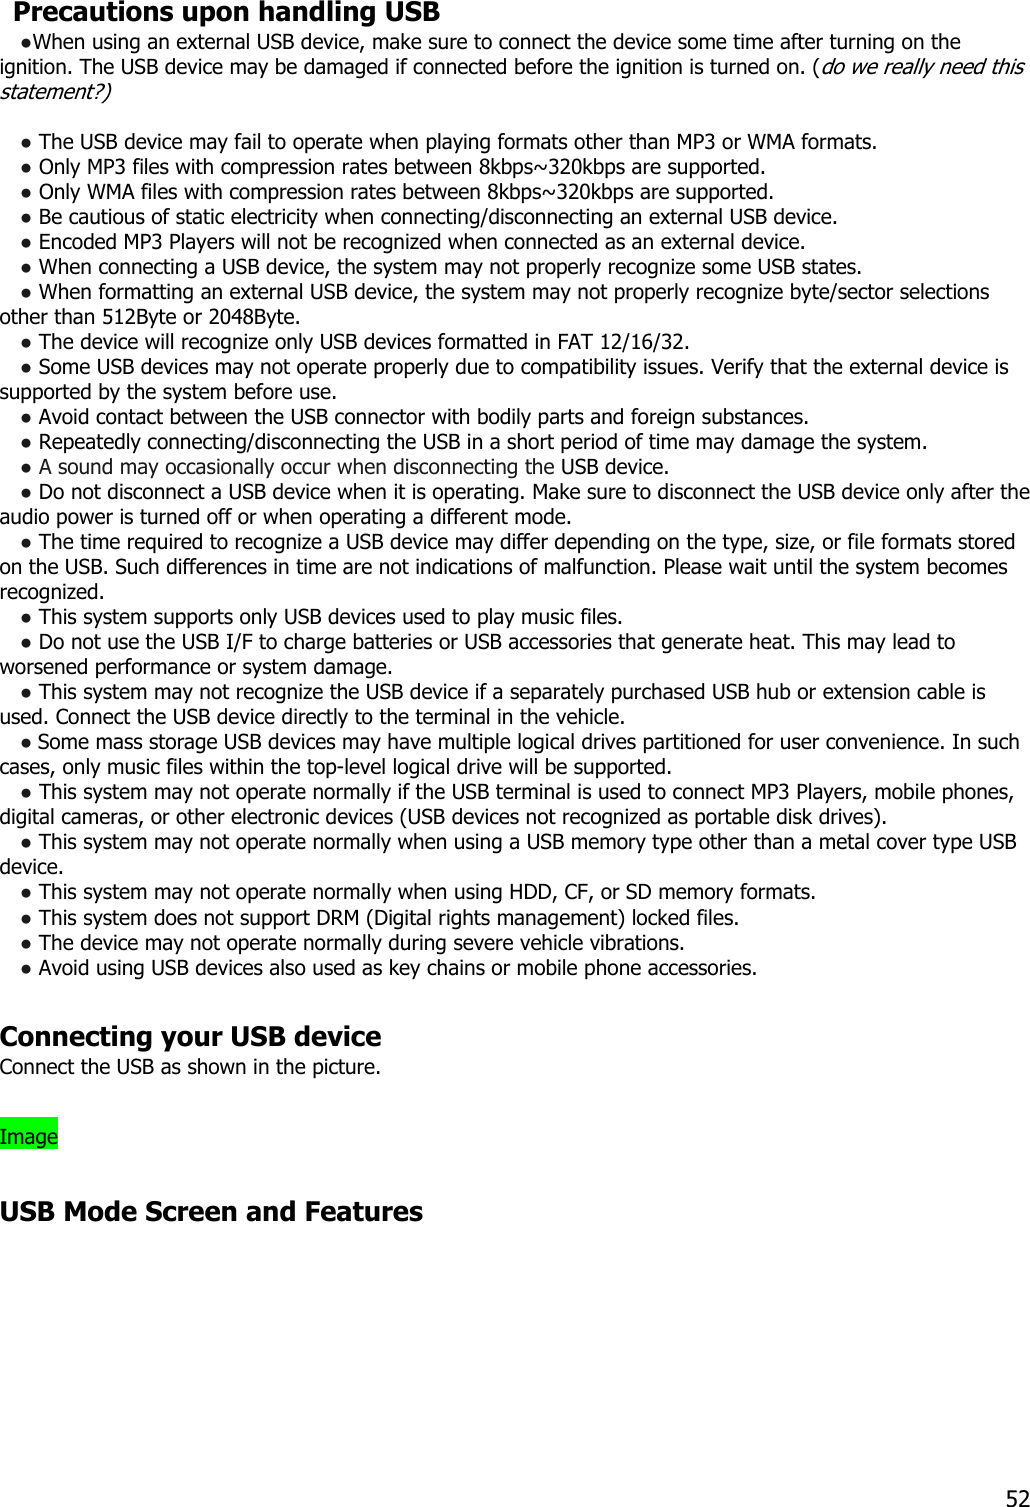   Precautions upon handling USB ●When using an external USB device, make sure to connect the device some time after turning on the ignition. The USB device may be damaged if connected before the ignition is turned on. (do we really need this statement?)   ● The USB device may fail to operate when playing formats other than MP3 or WMA formats. ● Only MP3 files with compression rates between 8kbps~320kbps are supported. ● Only WMA files with compression rates between 8kbps~320kbps are supported. ● Be cautious of static electricity when connecting/disconnecting an external USB device. ● Encoded MP3 Players will not be recognized when connected as an external device. ● When connecting a USB device, the system may not properly recognize some USB states. ● When formatting an external USB device, the system may not properly recognize byte/sector selections other than 512Byte or 2048Byte. ● The device will recognize only USB devices formatted in FAT 12/16/32. ● Some USB devices may not operate properly due to compatibility issues. Verify that the external device is supported by the system before use. ● Avoid contact between the USB connector with bodily parts and foreign substances. ● Repeatedly connecting/disconnecting the USB in a short period of time may damage the system. ● A sound may occasionally occur when disconnecting the USB device. ● Do not disconnect a USB device when it is operating. Make sure to disconnect the USB device only after the audio power is turned off or when operating a different mode.   ● The time required to recognize a USB device may differ depending on the type, size, or file formats stored on the USB. Such differences in time are not indications of malfunction. Please wait until the system becomes recognized. ● This system supports only USB devices used to play music files. ● Do not use the USB I/F to charge batteries or USB accessories that generate heat. This may lead to worsened performance or system damage. ● This system may not recognize the USB device if a separately purchased USB hub or extension cable is used. Connect the USB device directly to the terminal in the vehicle. ● Some mass storage USB devices may have multiple logical drives partitioned for user convenience. In such cases, only music files within the top-level logical drive will be supported.   ● This system may not operate normally if the USB terminal is used to connect MP3 Players, mobile phones, digital cameras, or other electronic devices (USB devices not recognized as portable disk drives). ● This system may not operate normally when using a USB memory type other than a metal cover type USB device. ● This system may not operate normally when using HDD, CF, or SD memory formats. ● This system does not support DRM (Digital rights management) locked files. ● The device may not operate normally during severe vehicle vibrations.   ● Avoid using USB devices also used as key chains or mobile phone accessories.    Connecting your USB device Connect the USB as shown in the picture.  Image  USB Mode Screen and Features  52